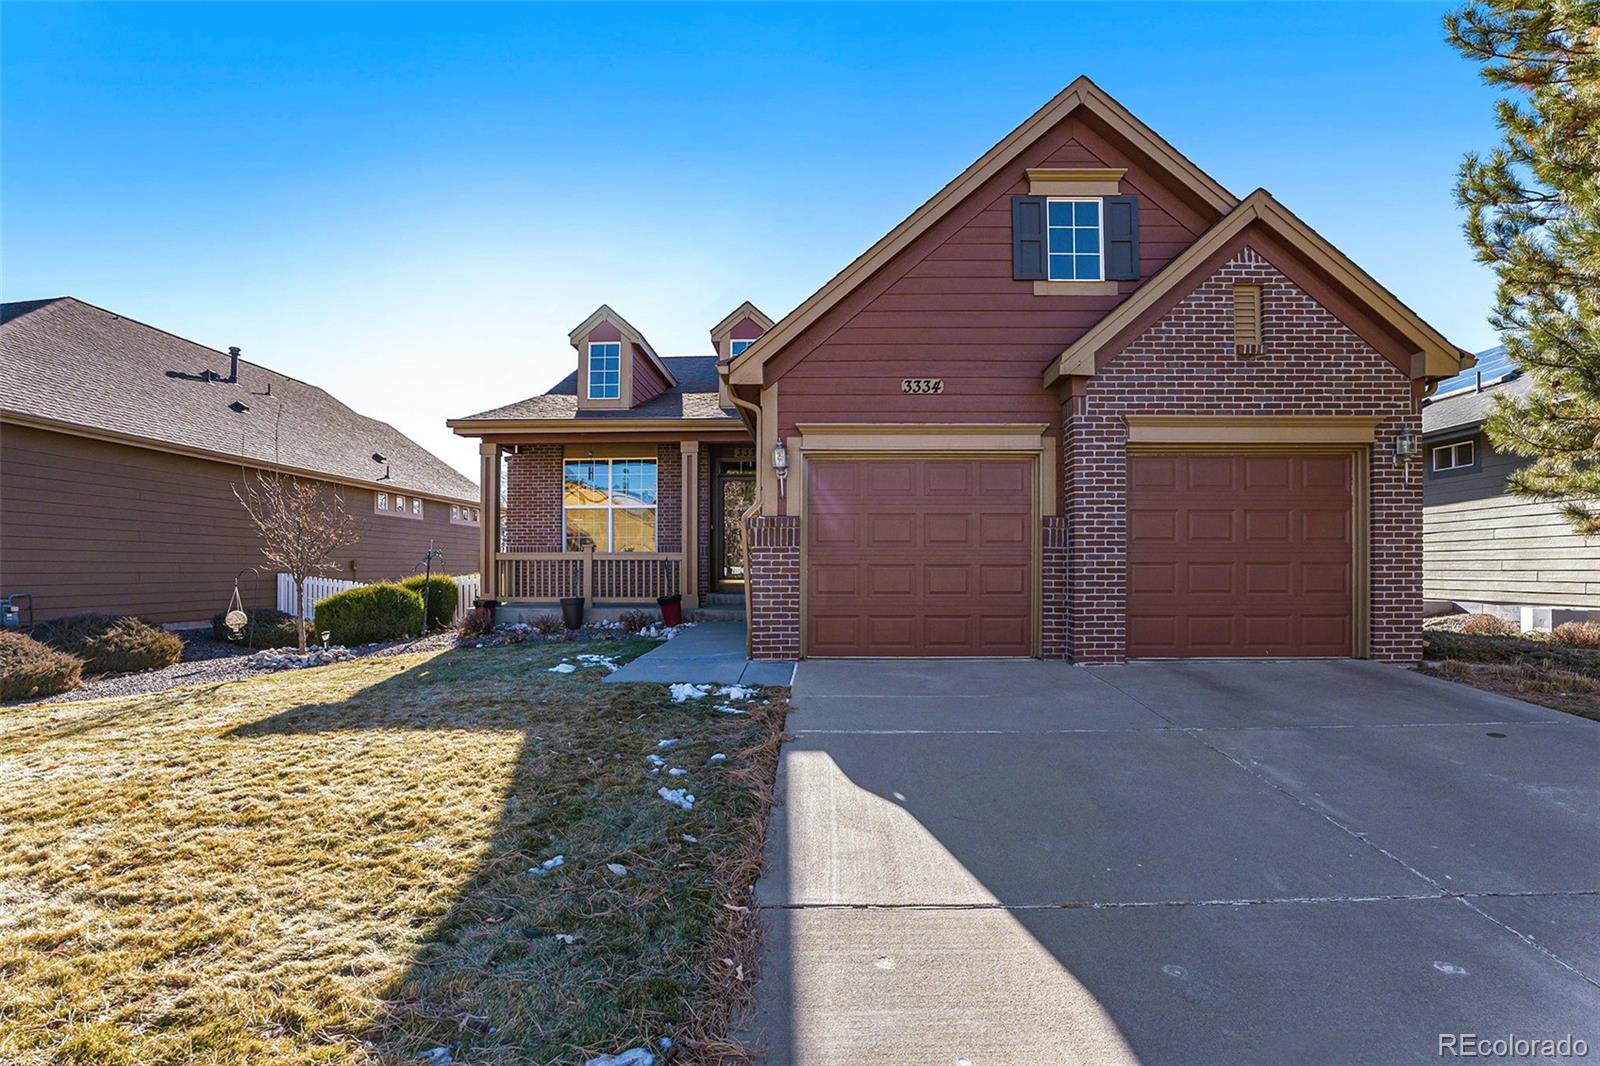 3334 w 126th place, broomfield sold home. Closed on 2024-02-12 for $583,800.